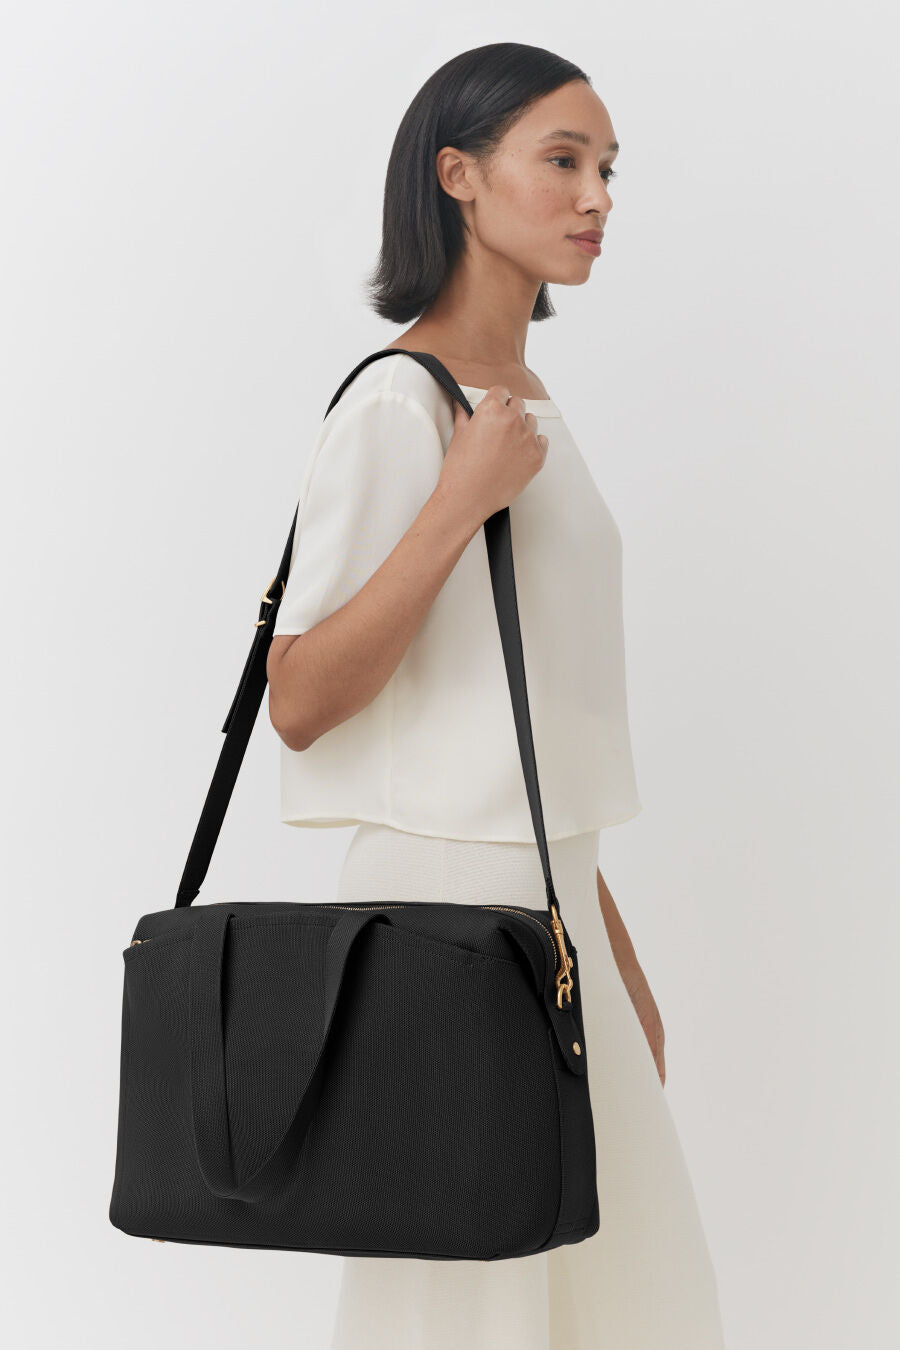 Woman standing sideways carrying a large shoulder bag.